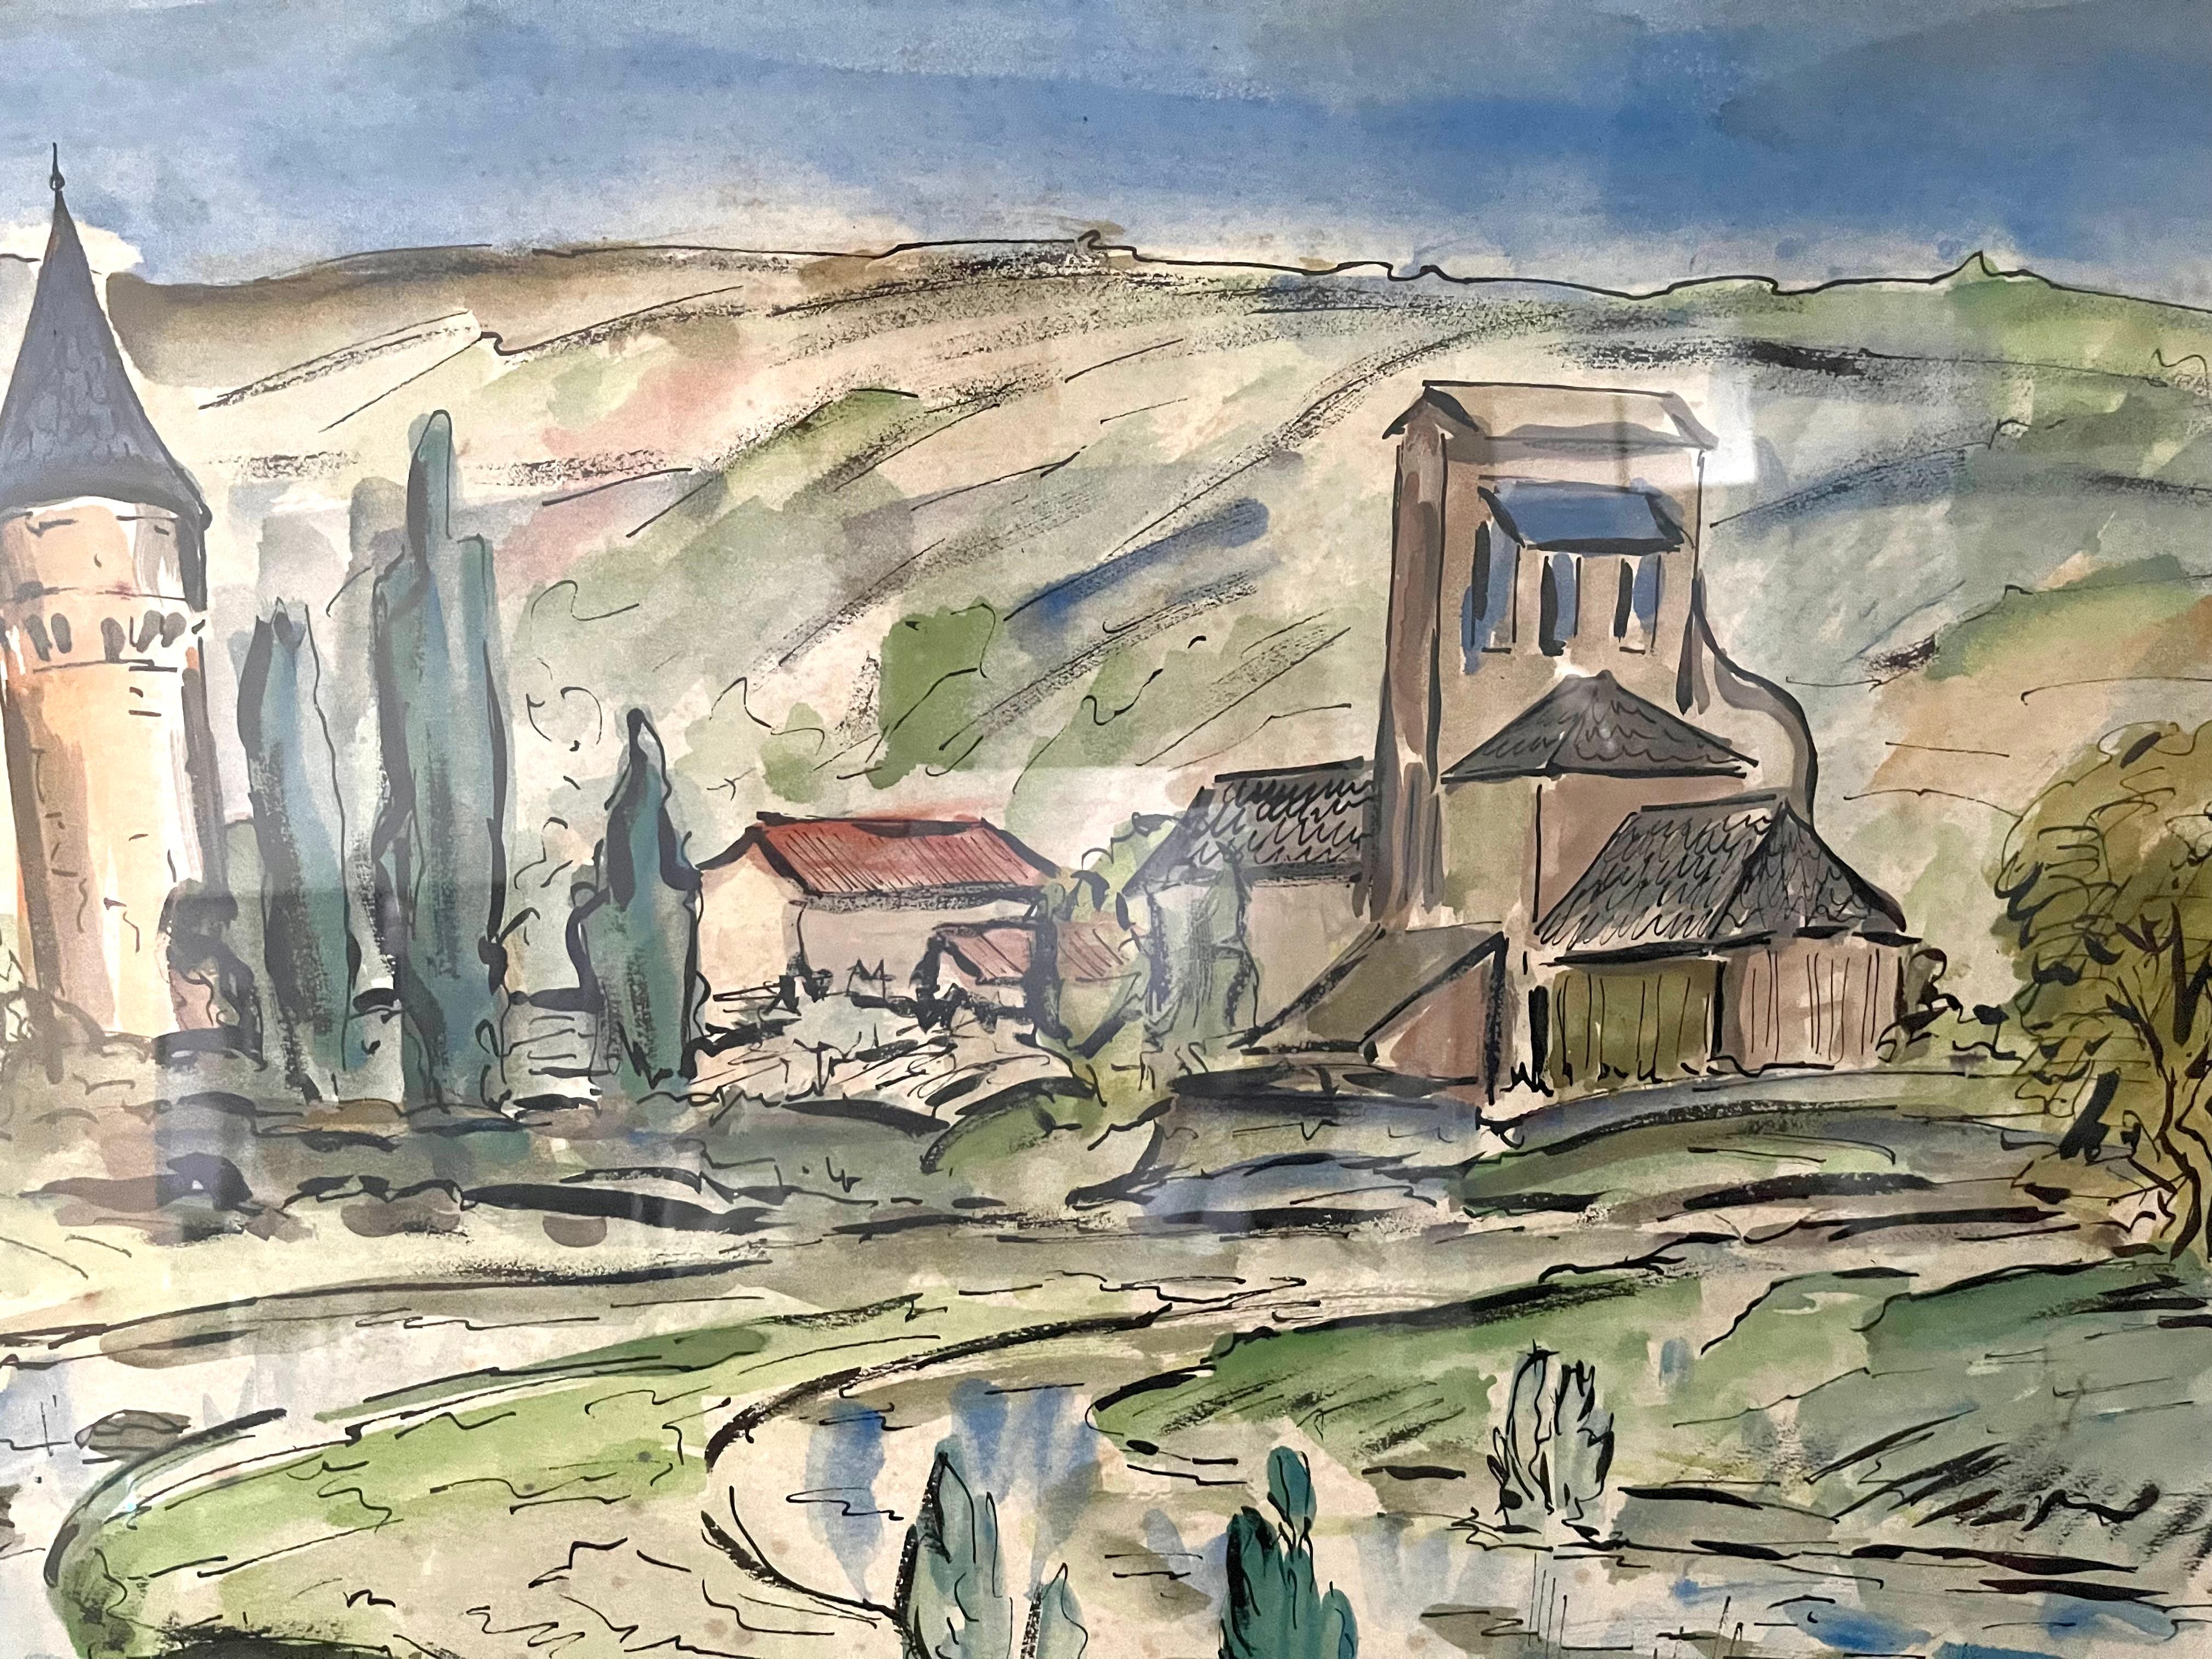 Large Watercolor Painting of a Southern France Landscape by Emile Pressac.
The painting is well-framed under glass.
Watercolor on paper.

Marcel PRESSAC, born in Paris, in the Faubourg Saint-Antoine, on October 14, 1926, spent his entire childhood